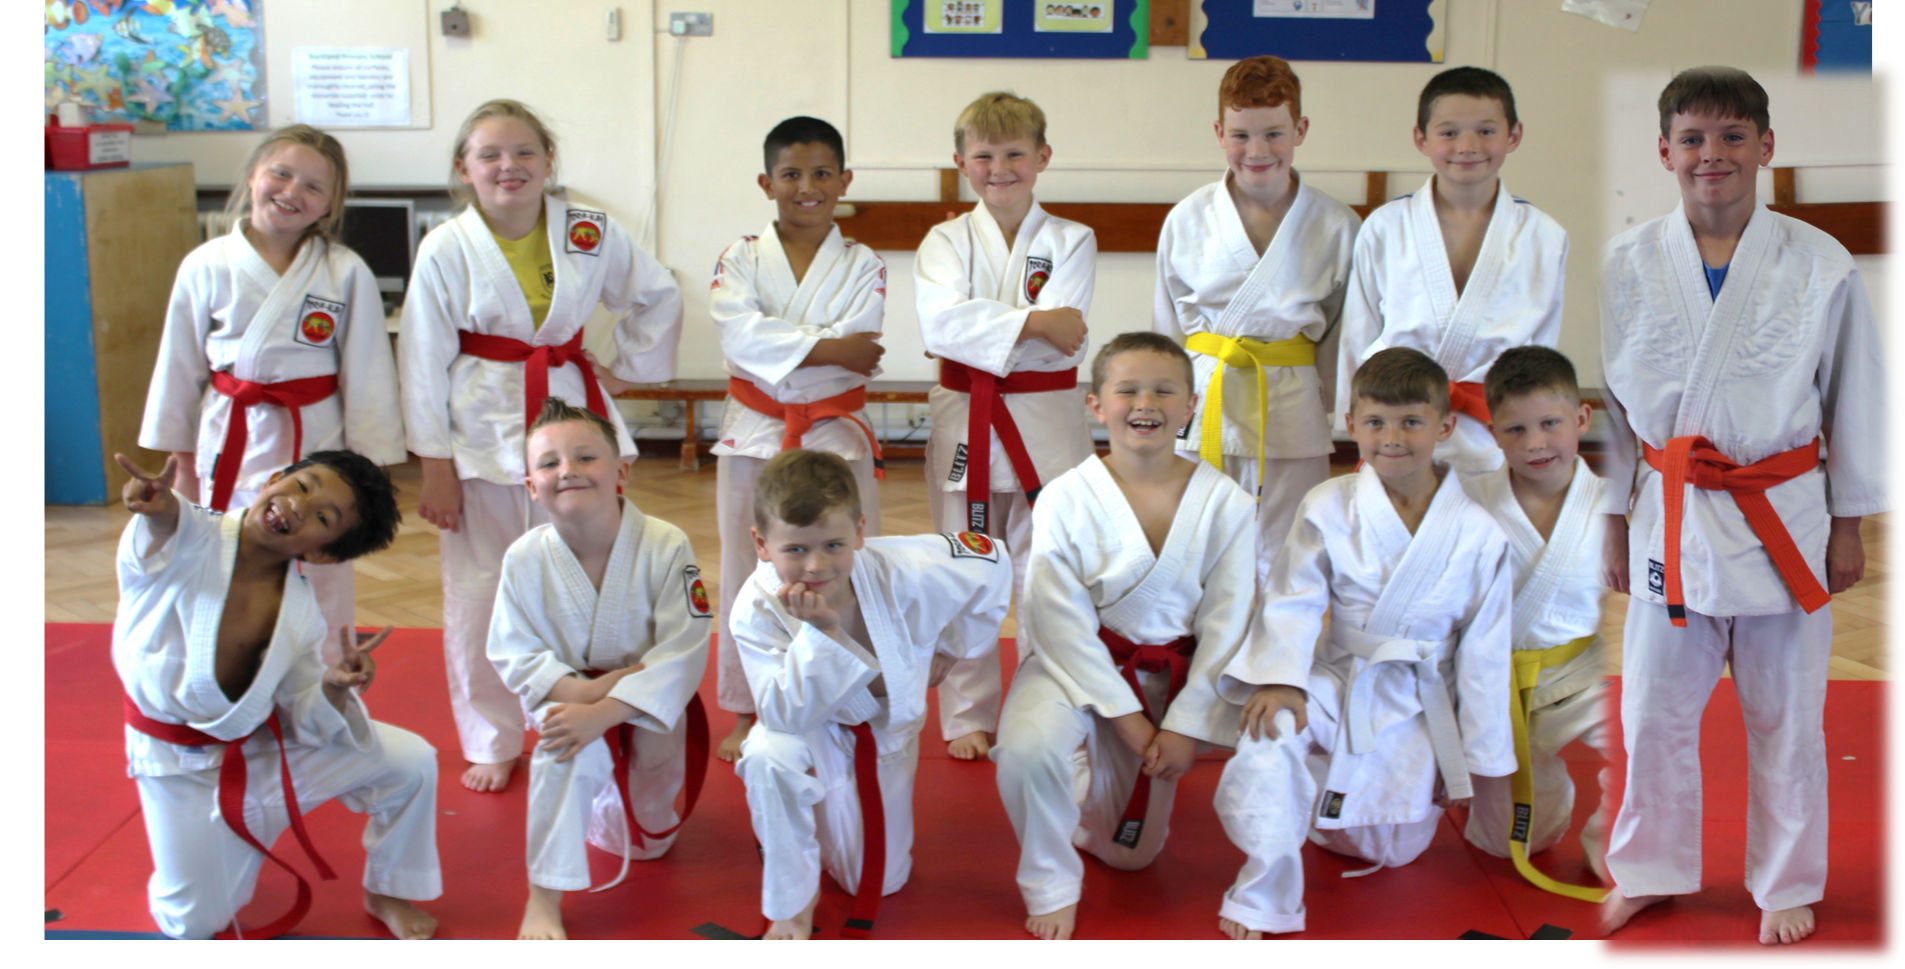 Childens Judo lessons in Laleham Staines - Buckland Primary School